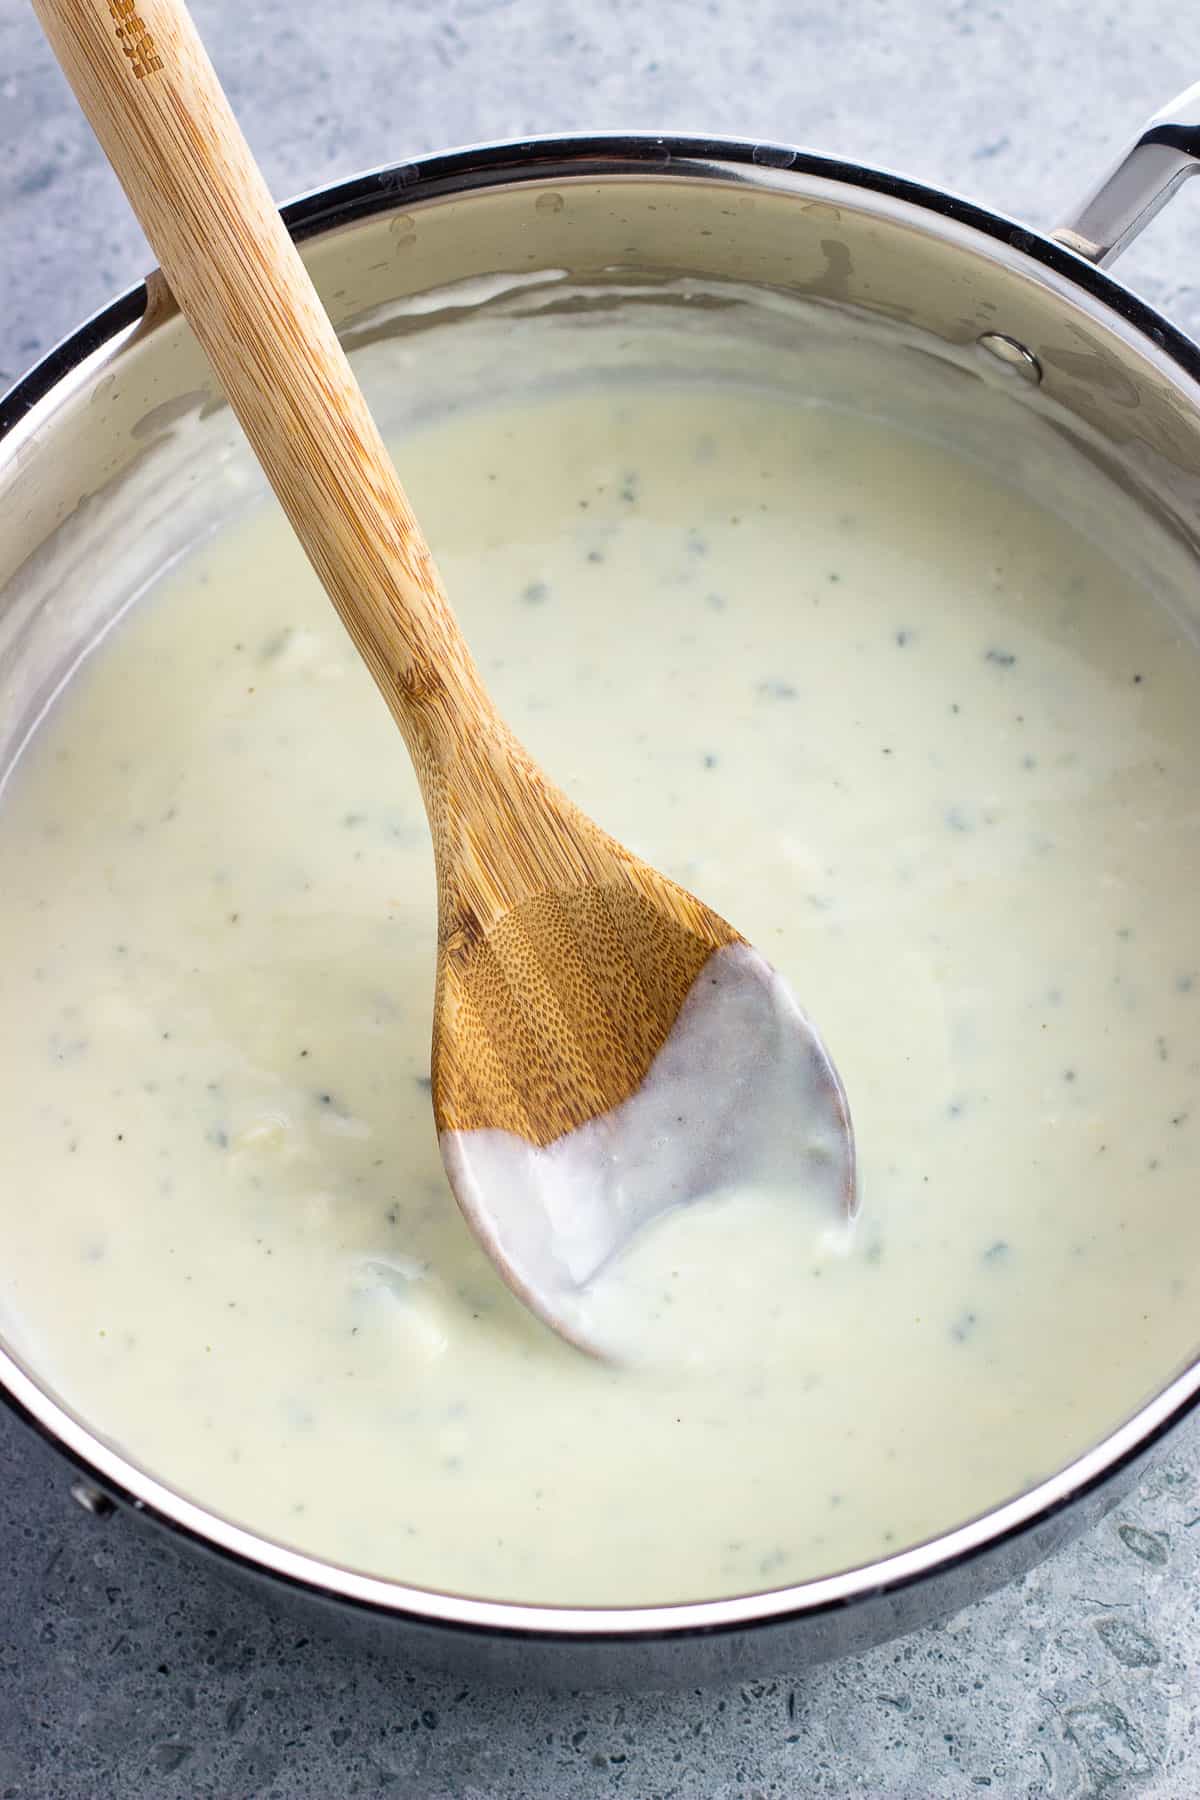 All Gorgonzola sauce ingredients added to the pan and thickened to coat a wooden spoon.